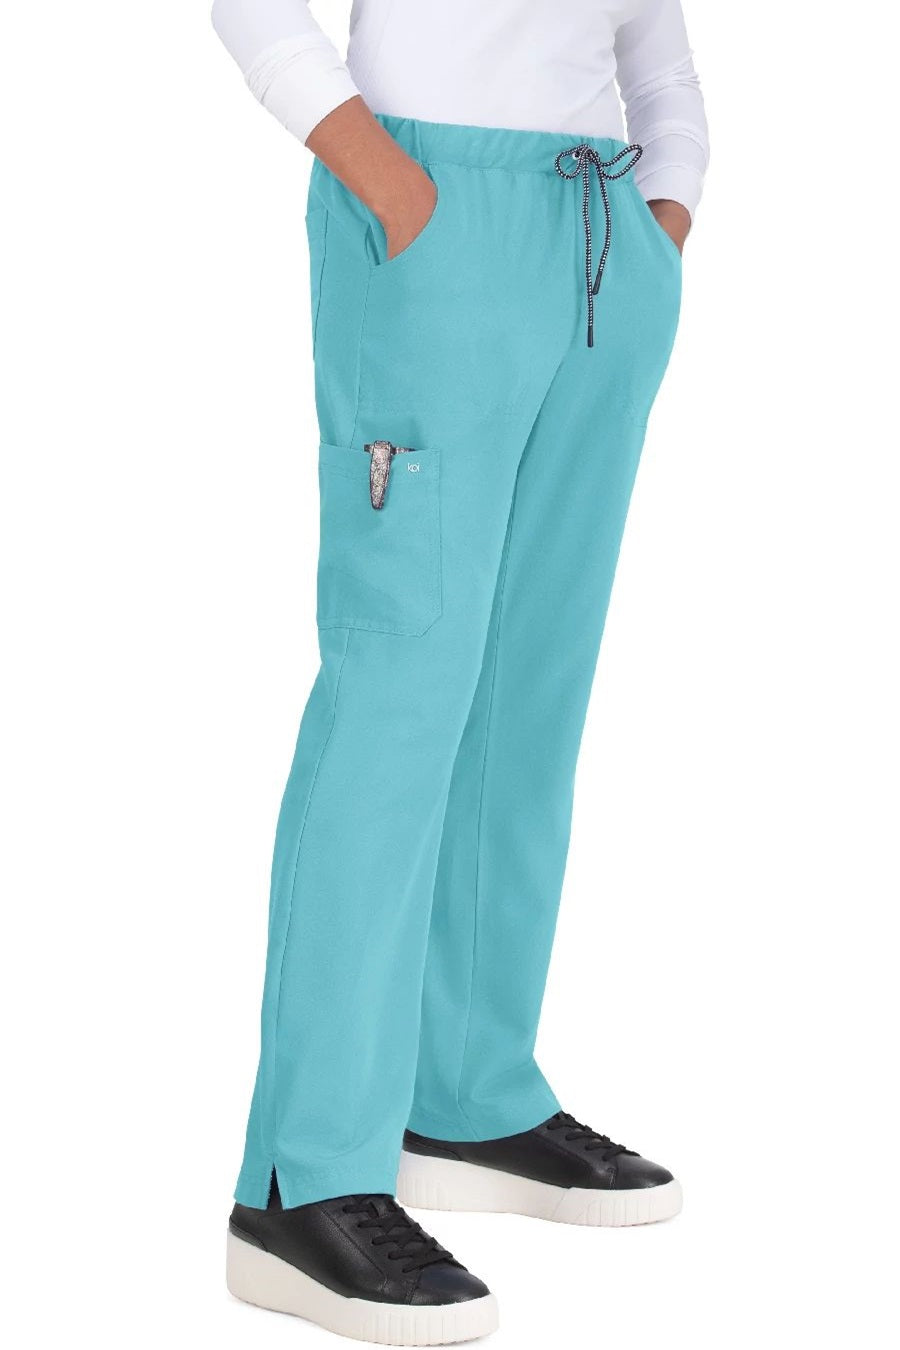 Koi Scrub Pant Next Gen Everyday Hero in Sea Glass at Parker's Clothing and Shoes.